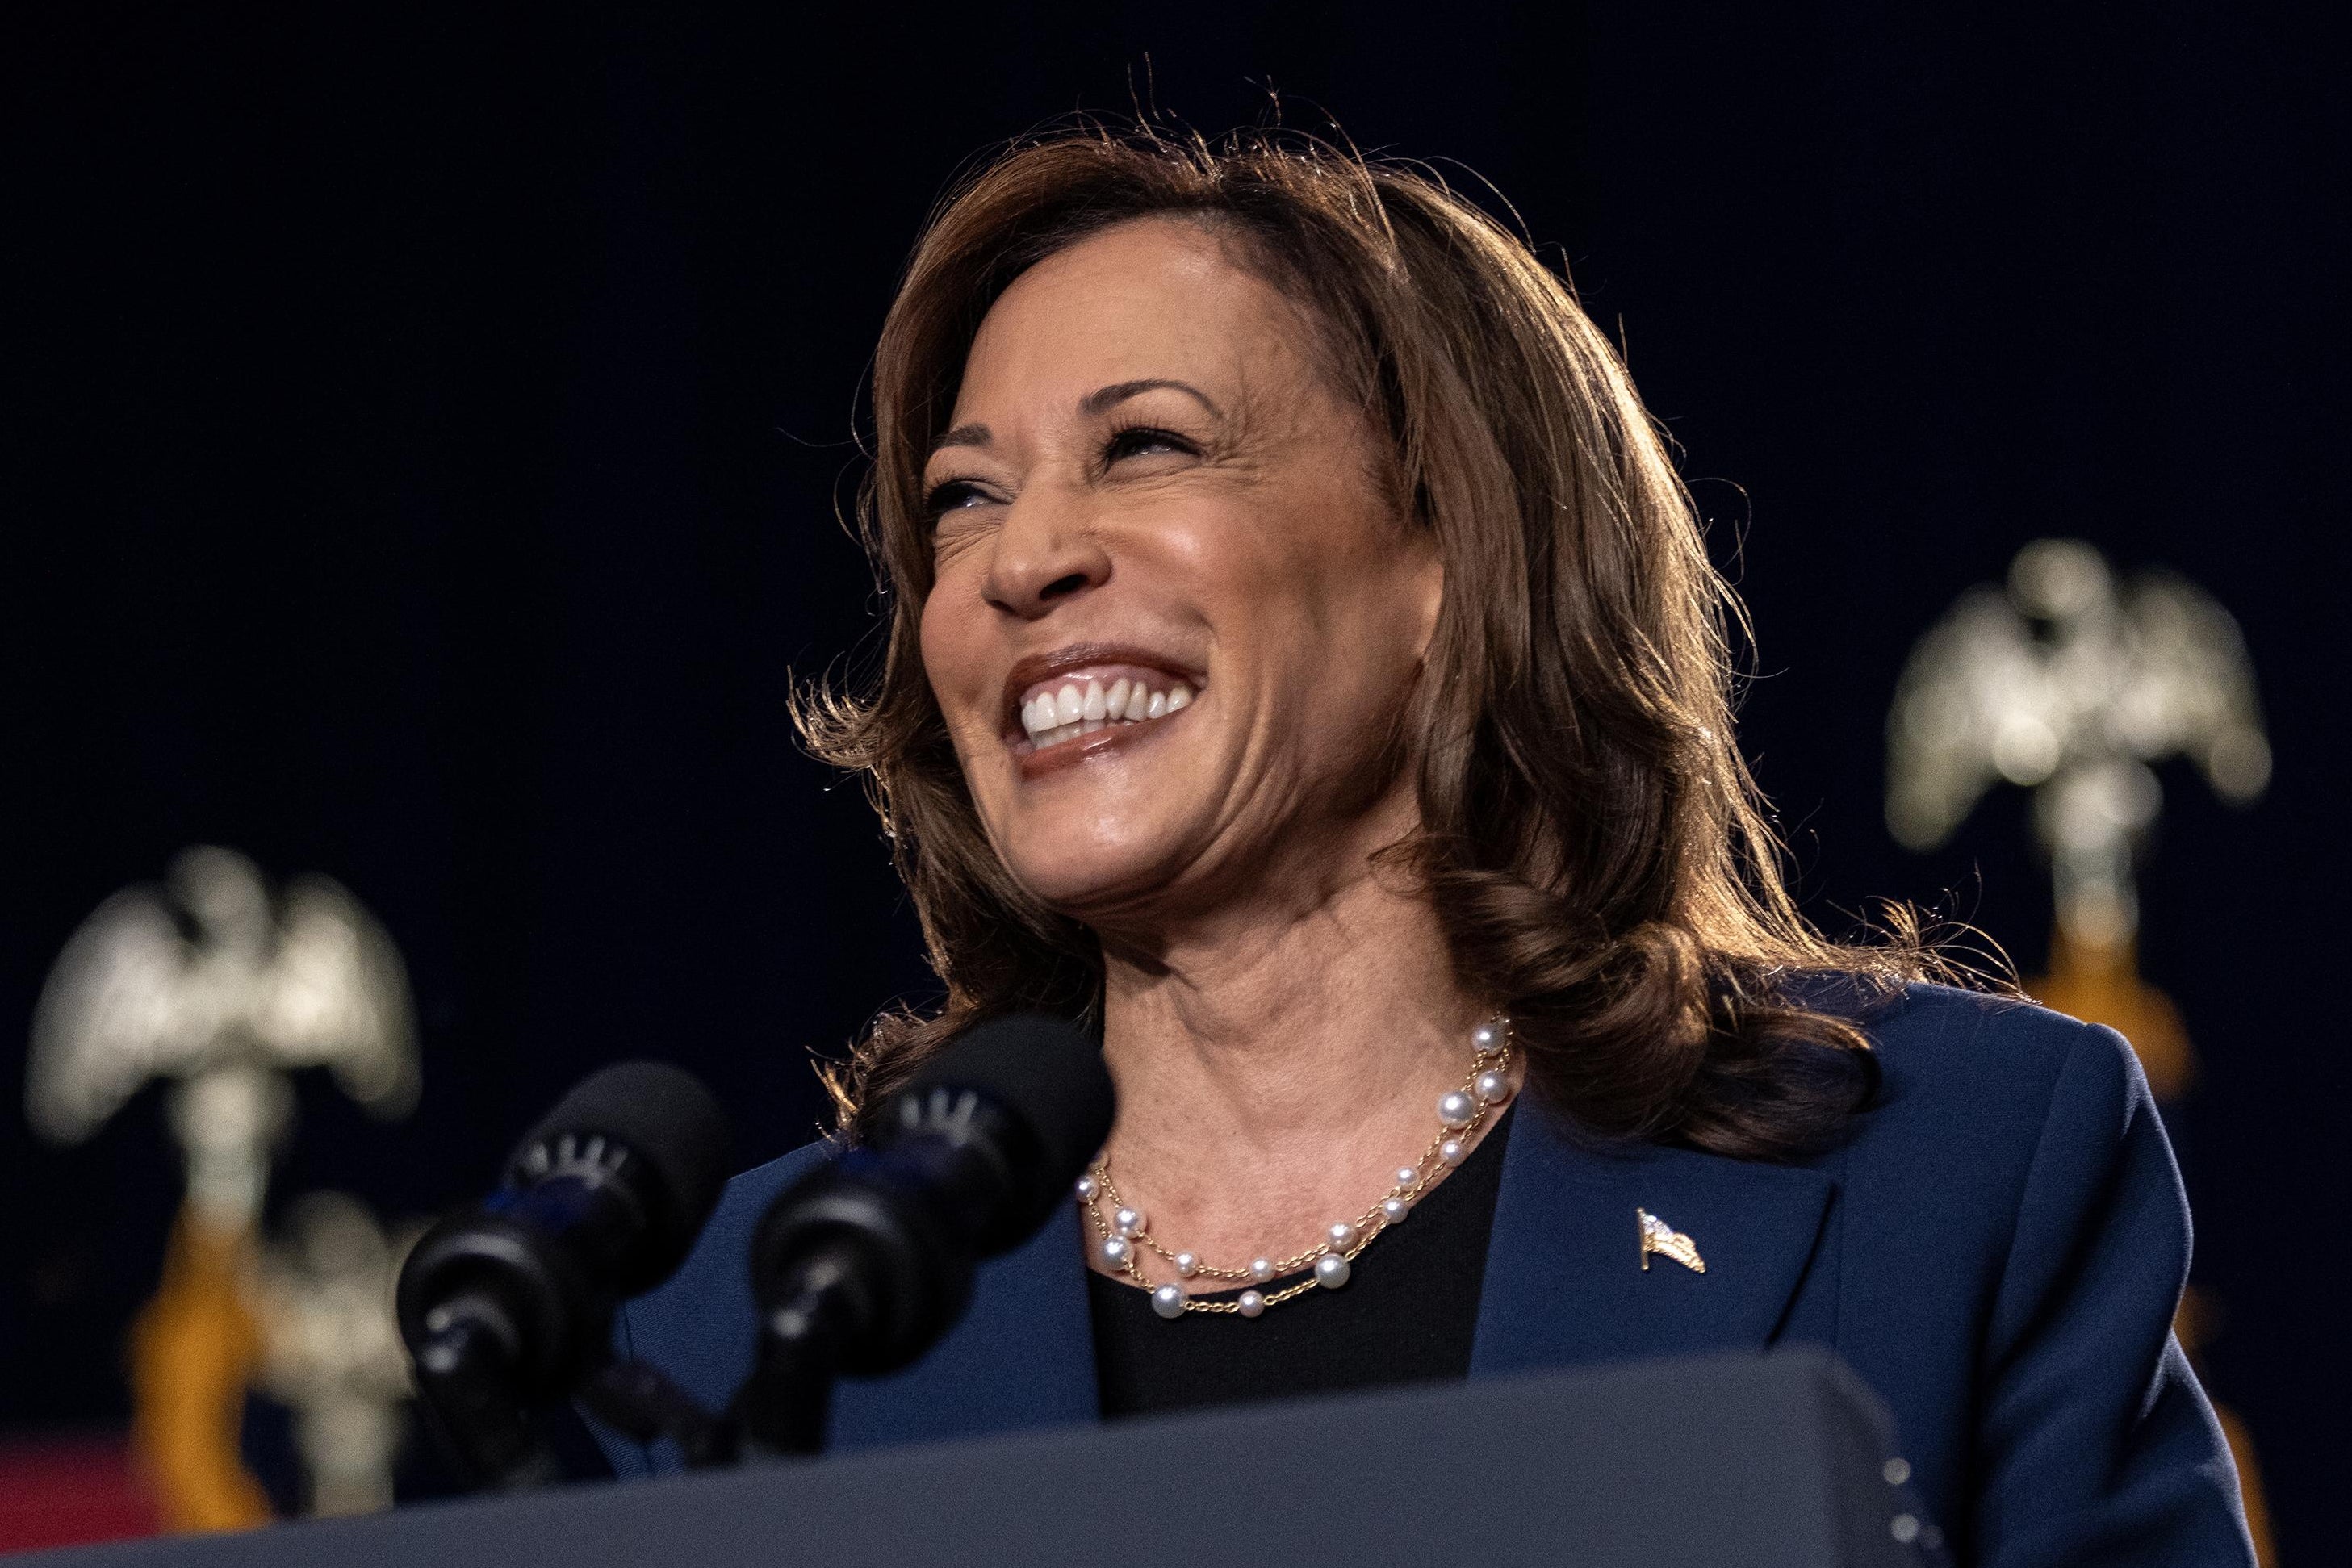 How Good Are Things Looking for Kamala Harris, Really?